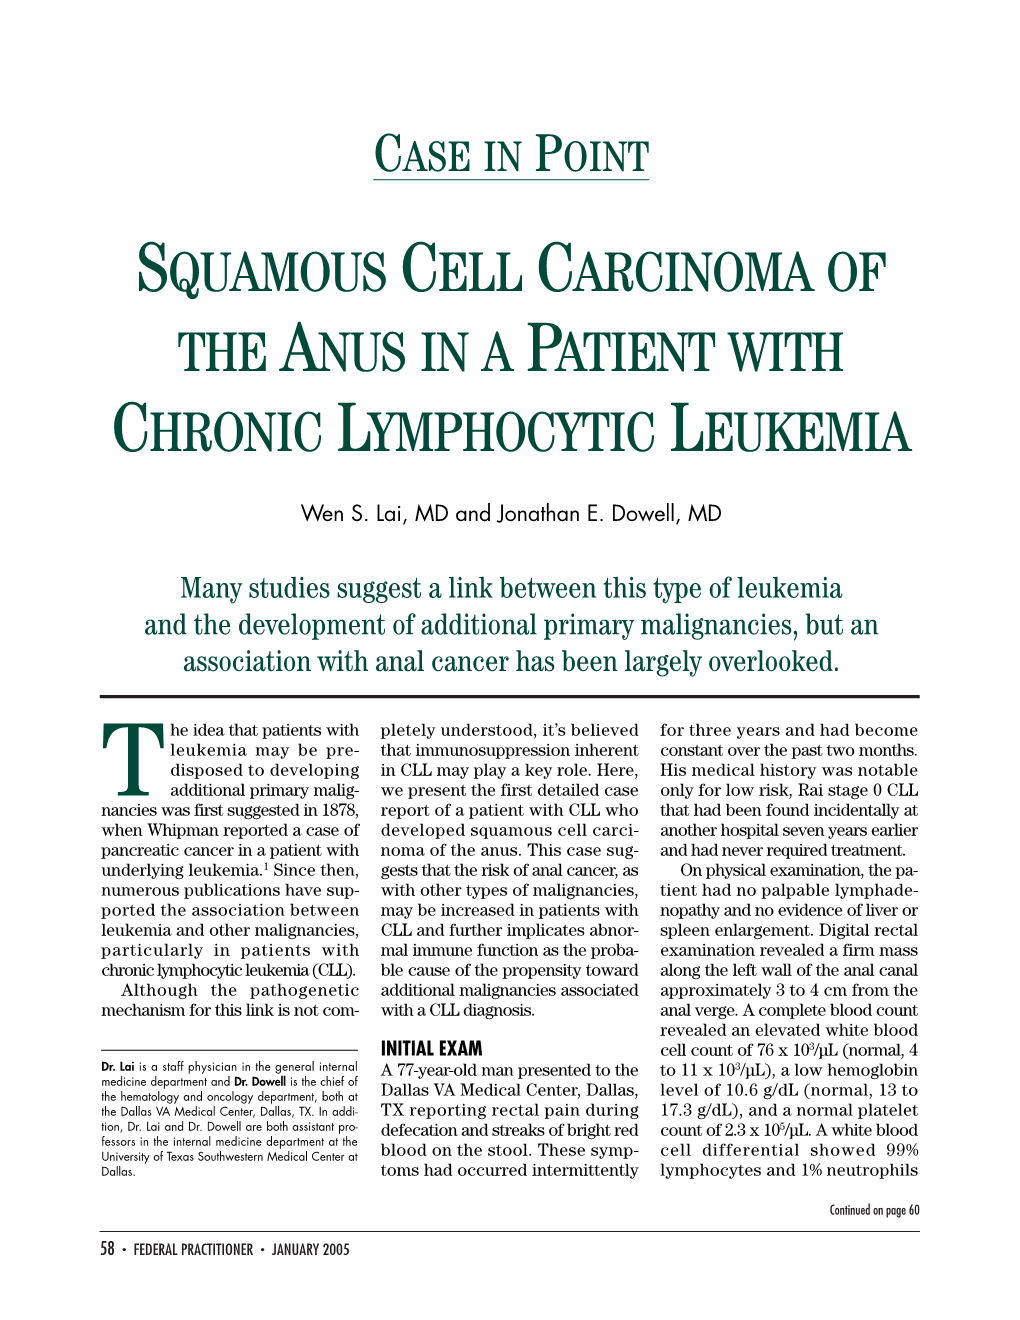 Squamous Cell Carcinoma of the Anus in a Patient with Chronic Lymphocytic Leukemia